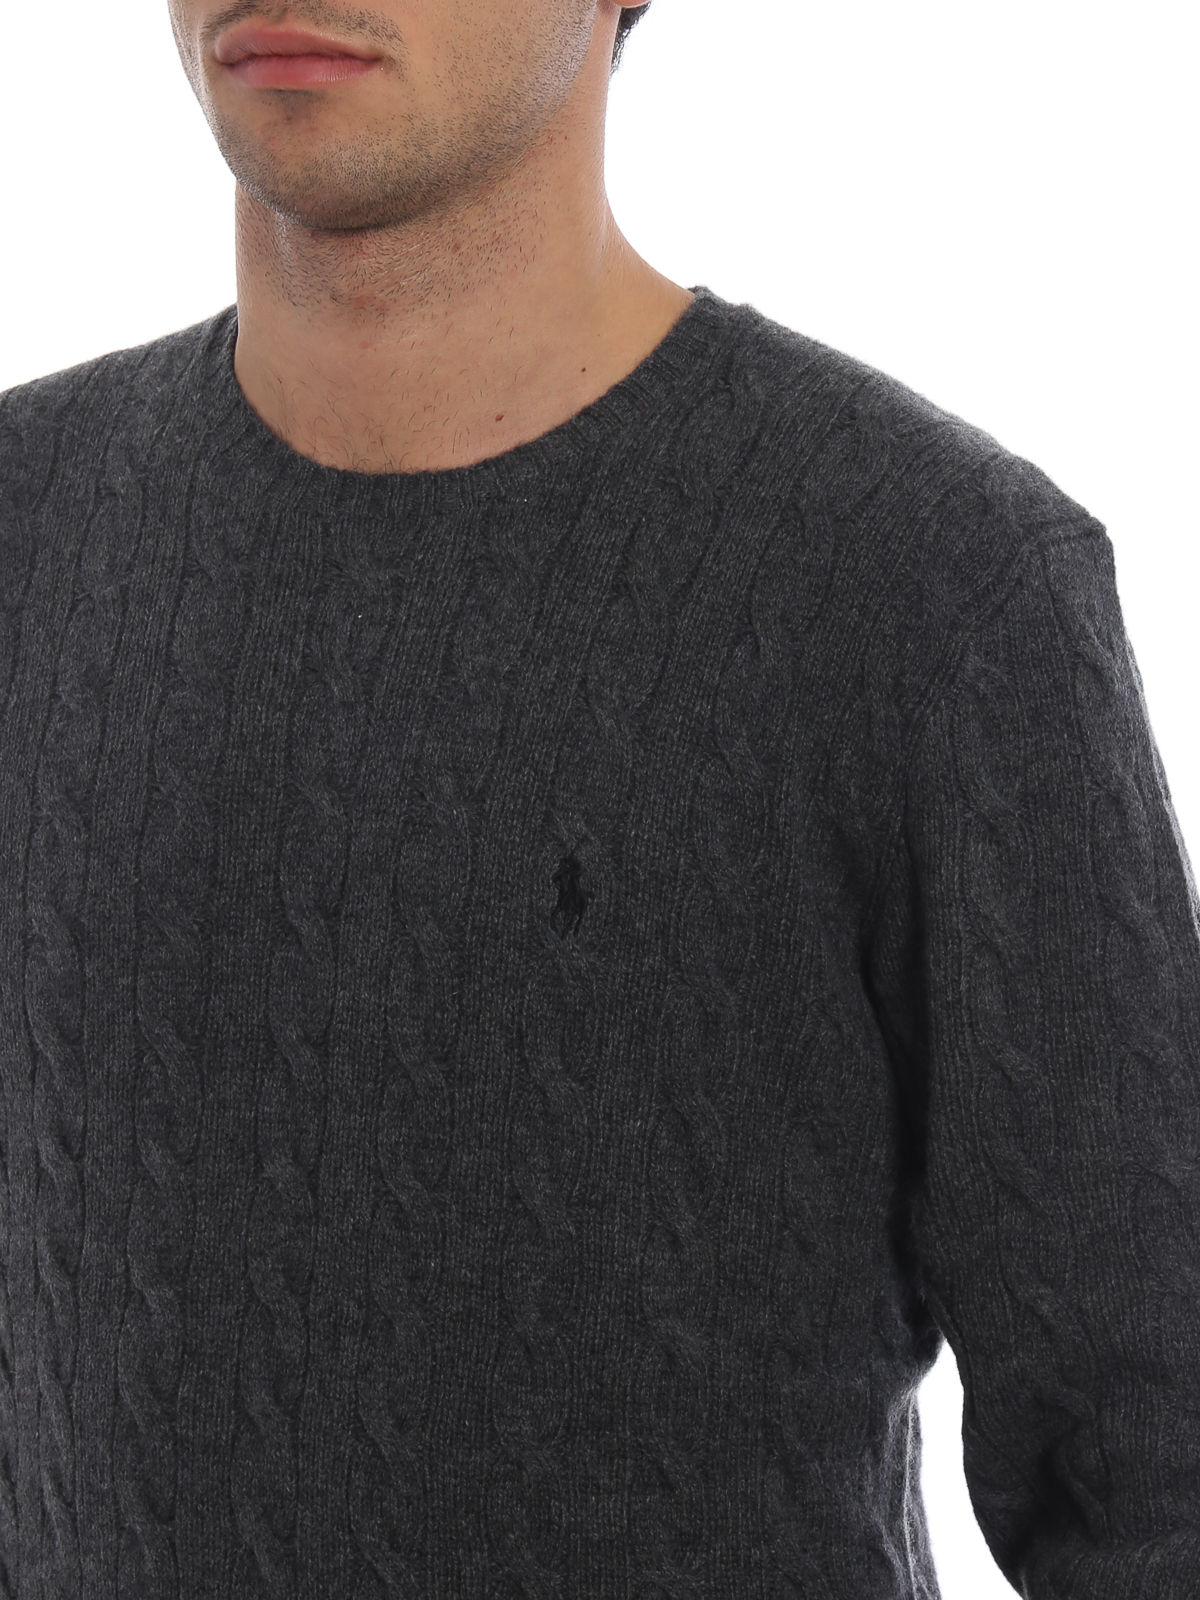 Polo Ralph Lauren - Cable knit wool and 